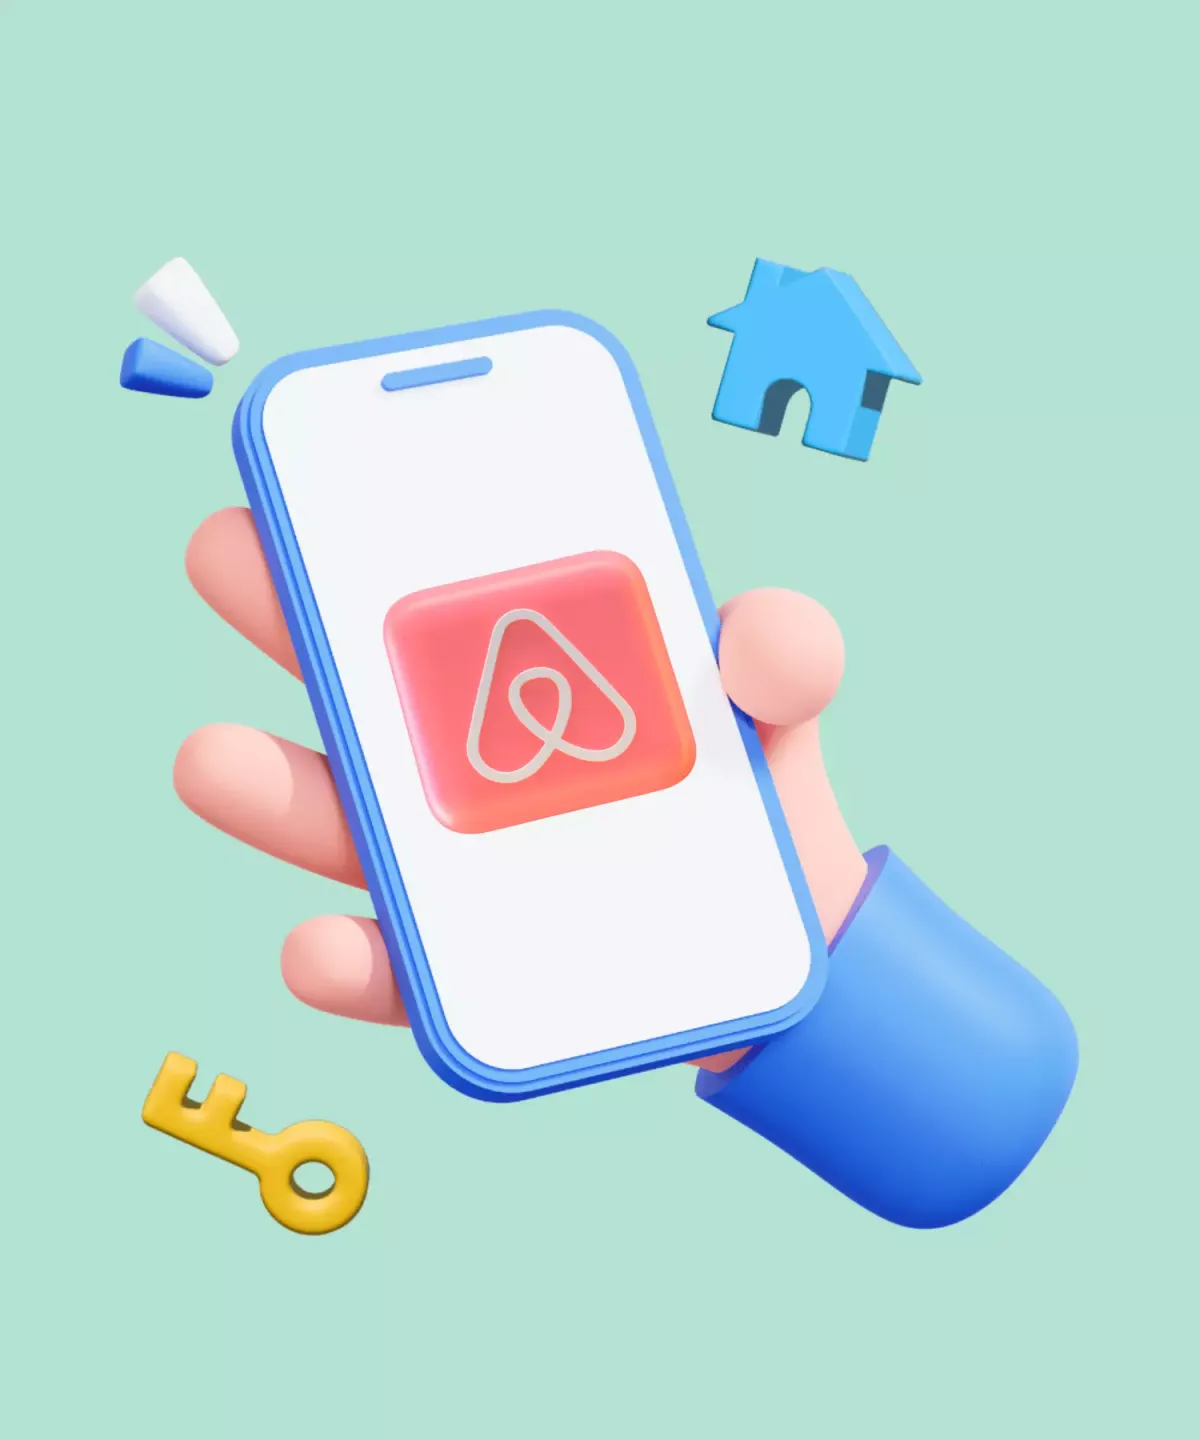 How to Make An App Like Airbnb: Features, Cost and More